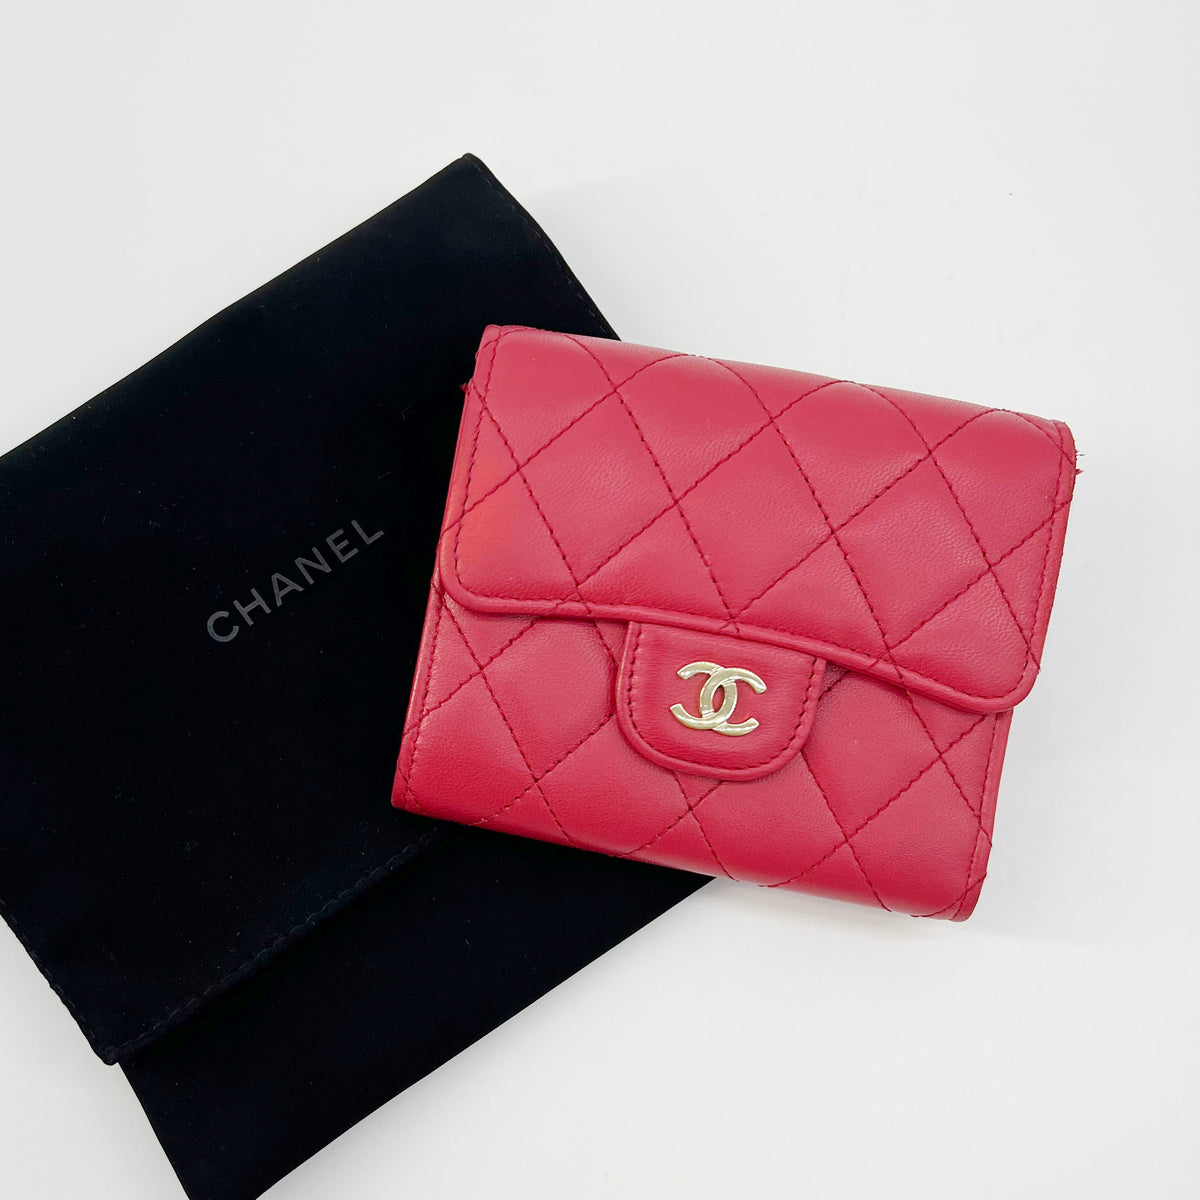 Chanel Classic Compact Flap Card Holder